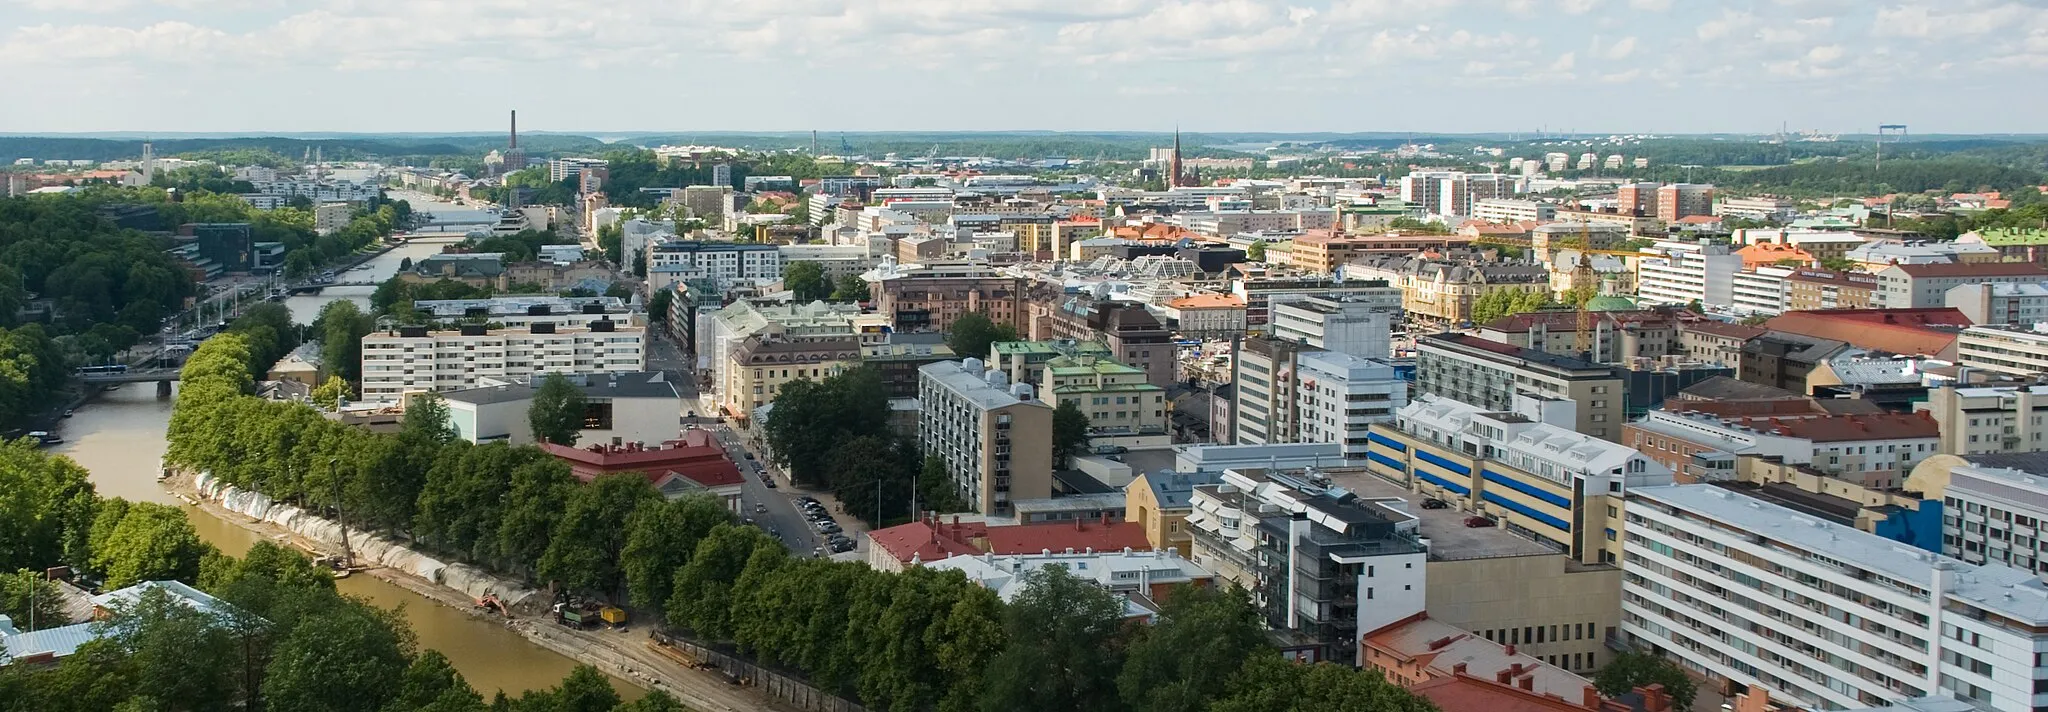 Photo showing: Turku as seen from the tower of Turku Cathedral. The photo mimics another photo taken in late 19th century.